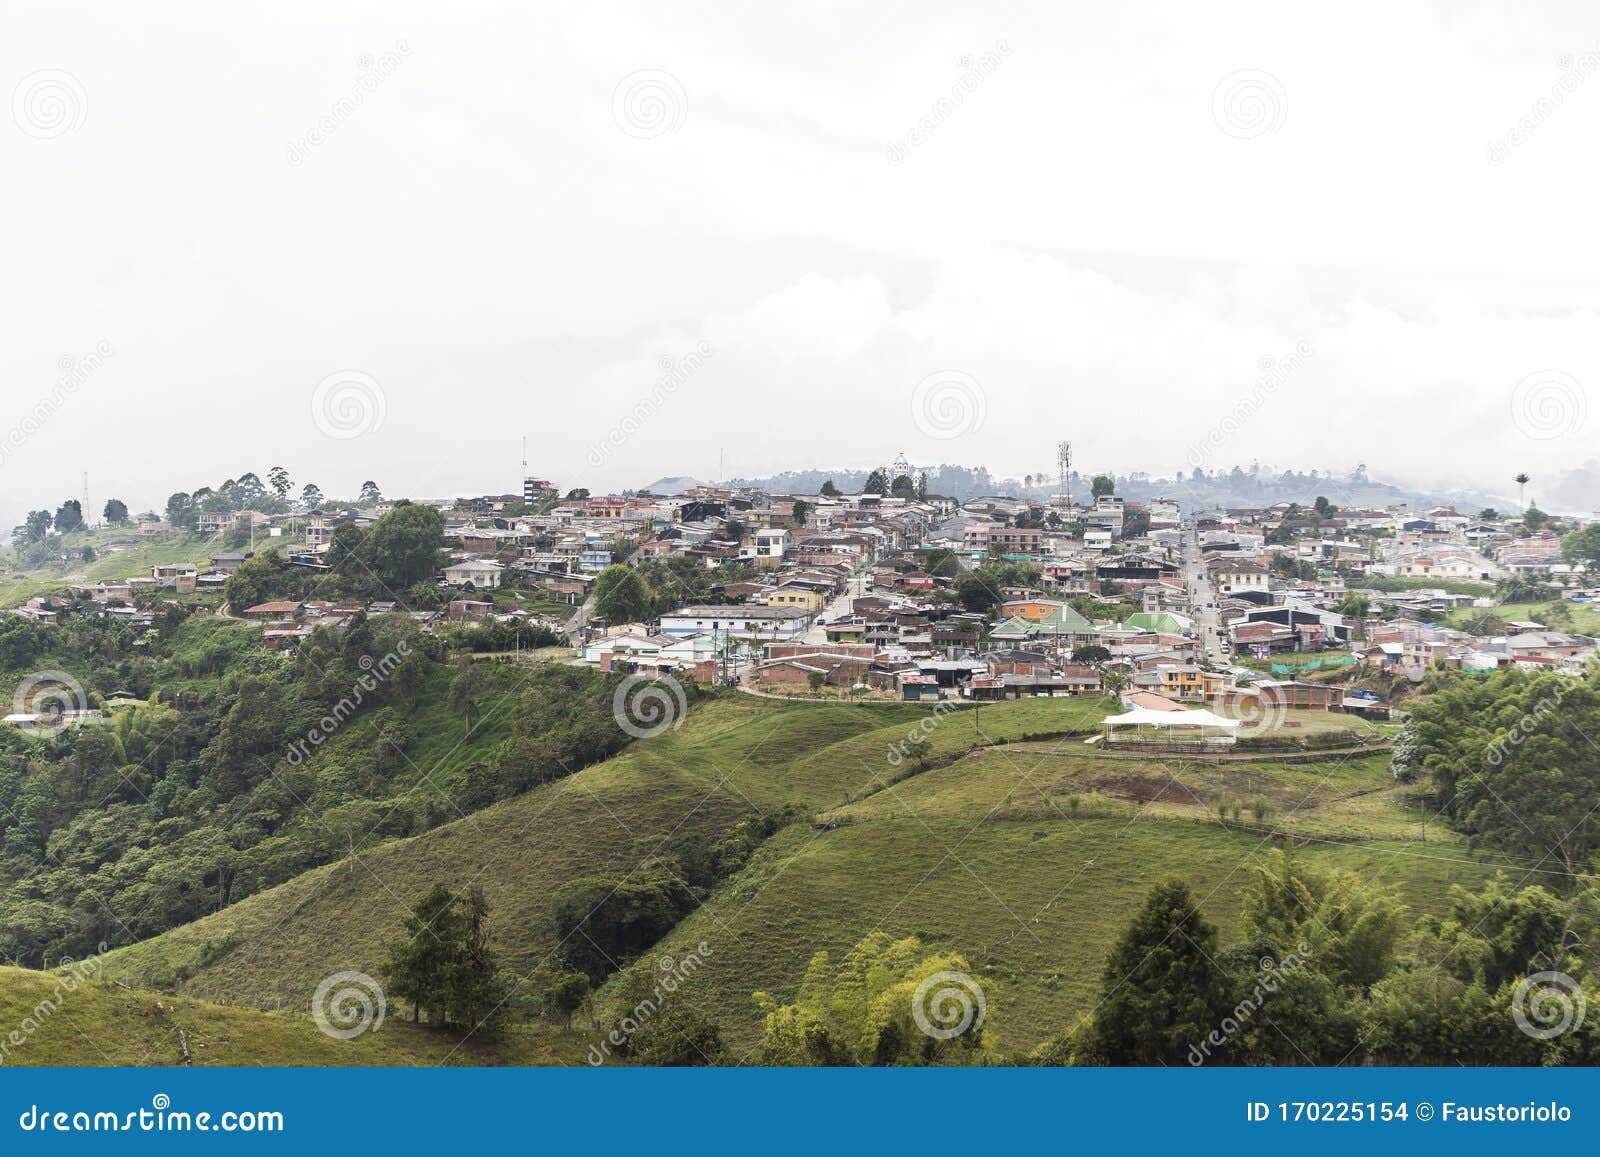 high views of lookout of filandia in quindio, colombia.